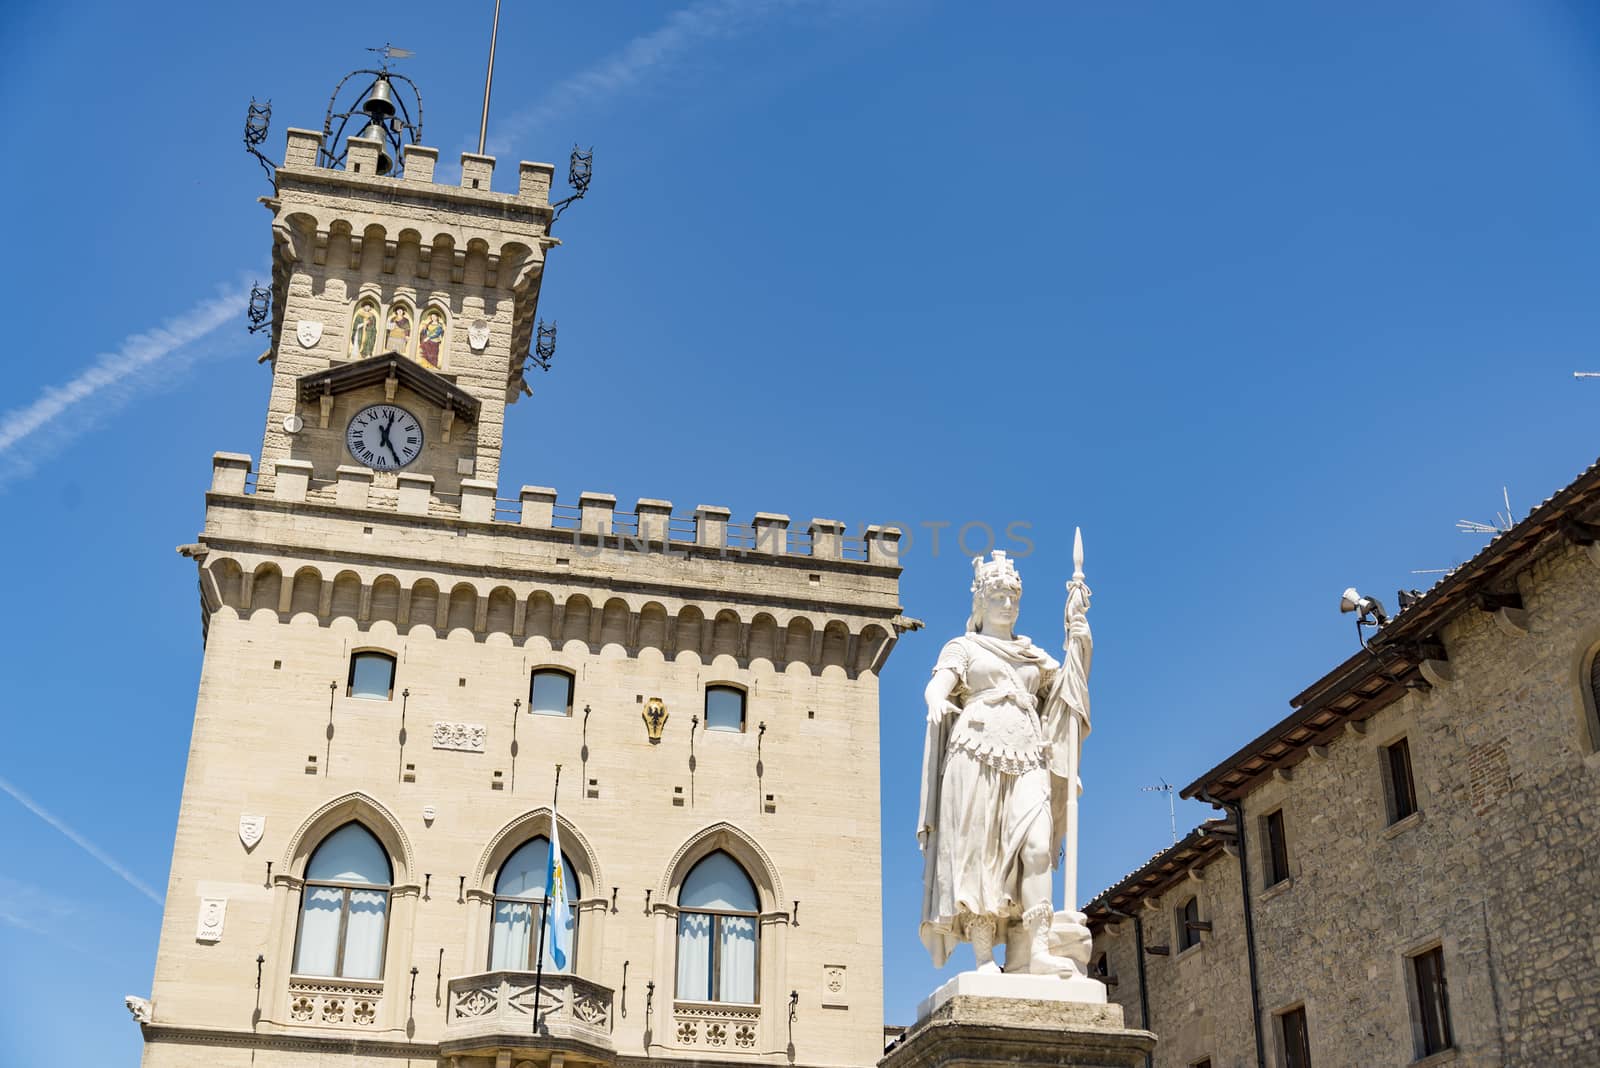 Central square of San Marino with the Public Palace and statue of Liberty in Sam Marino Republic